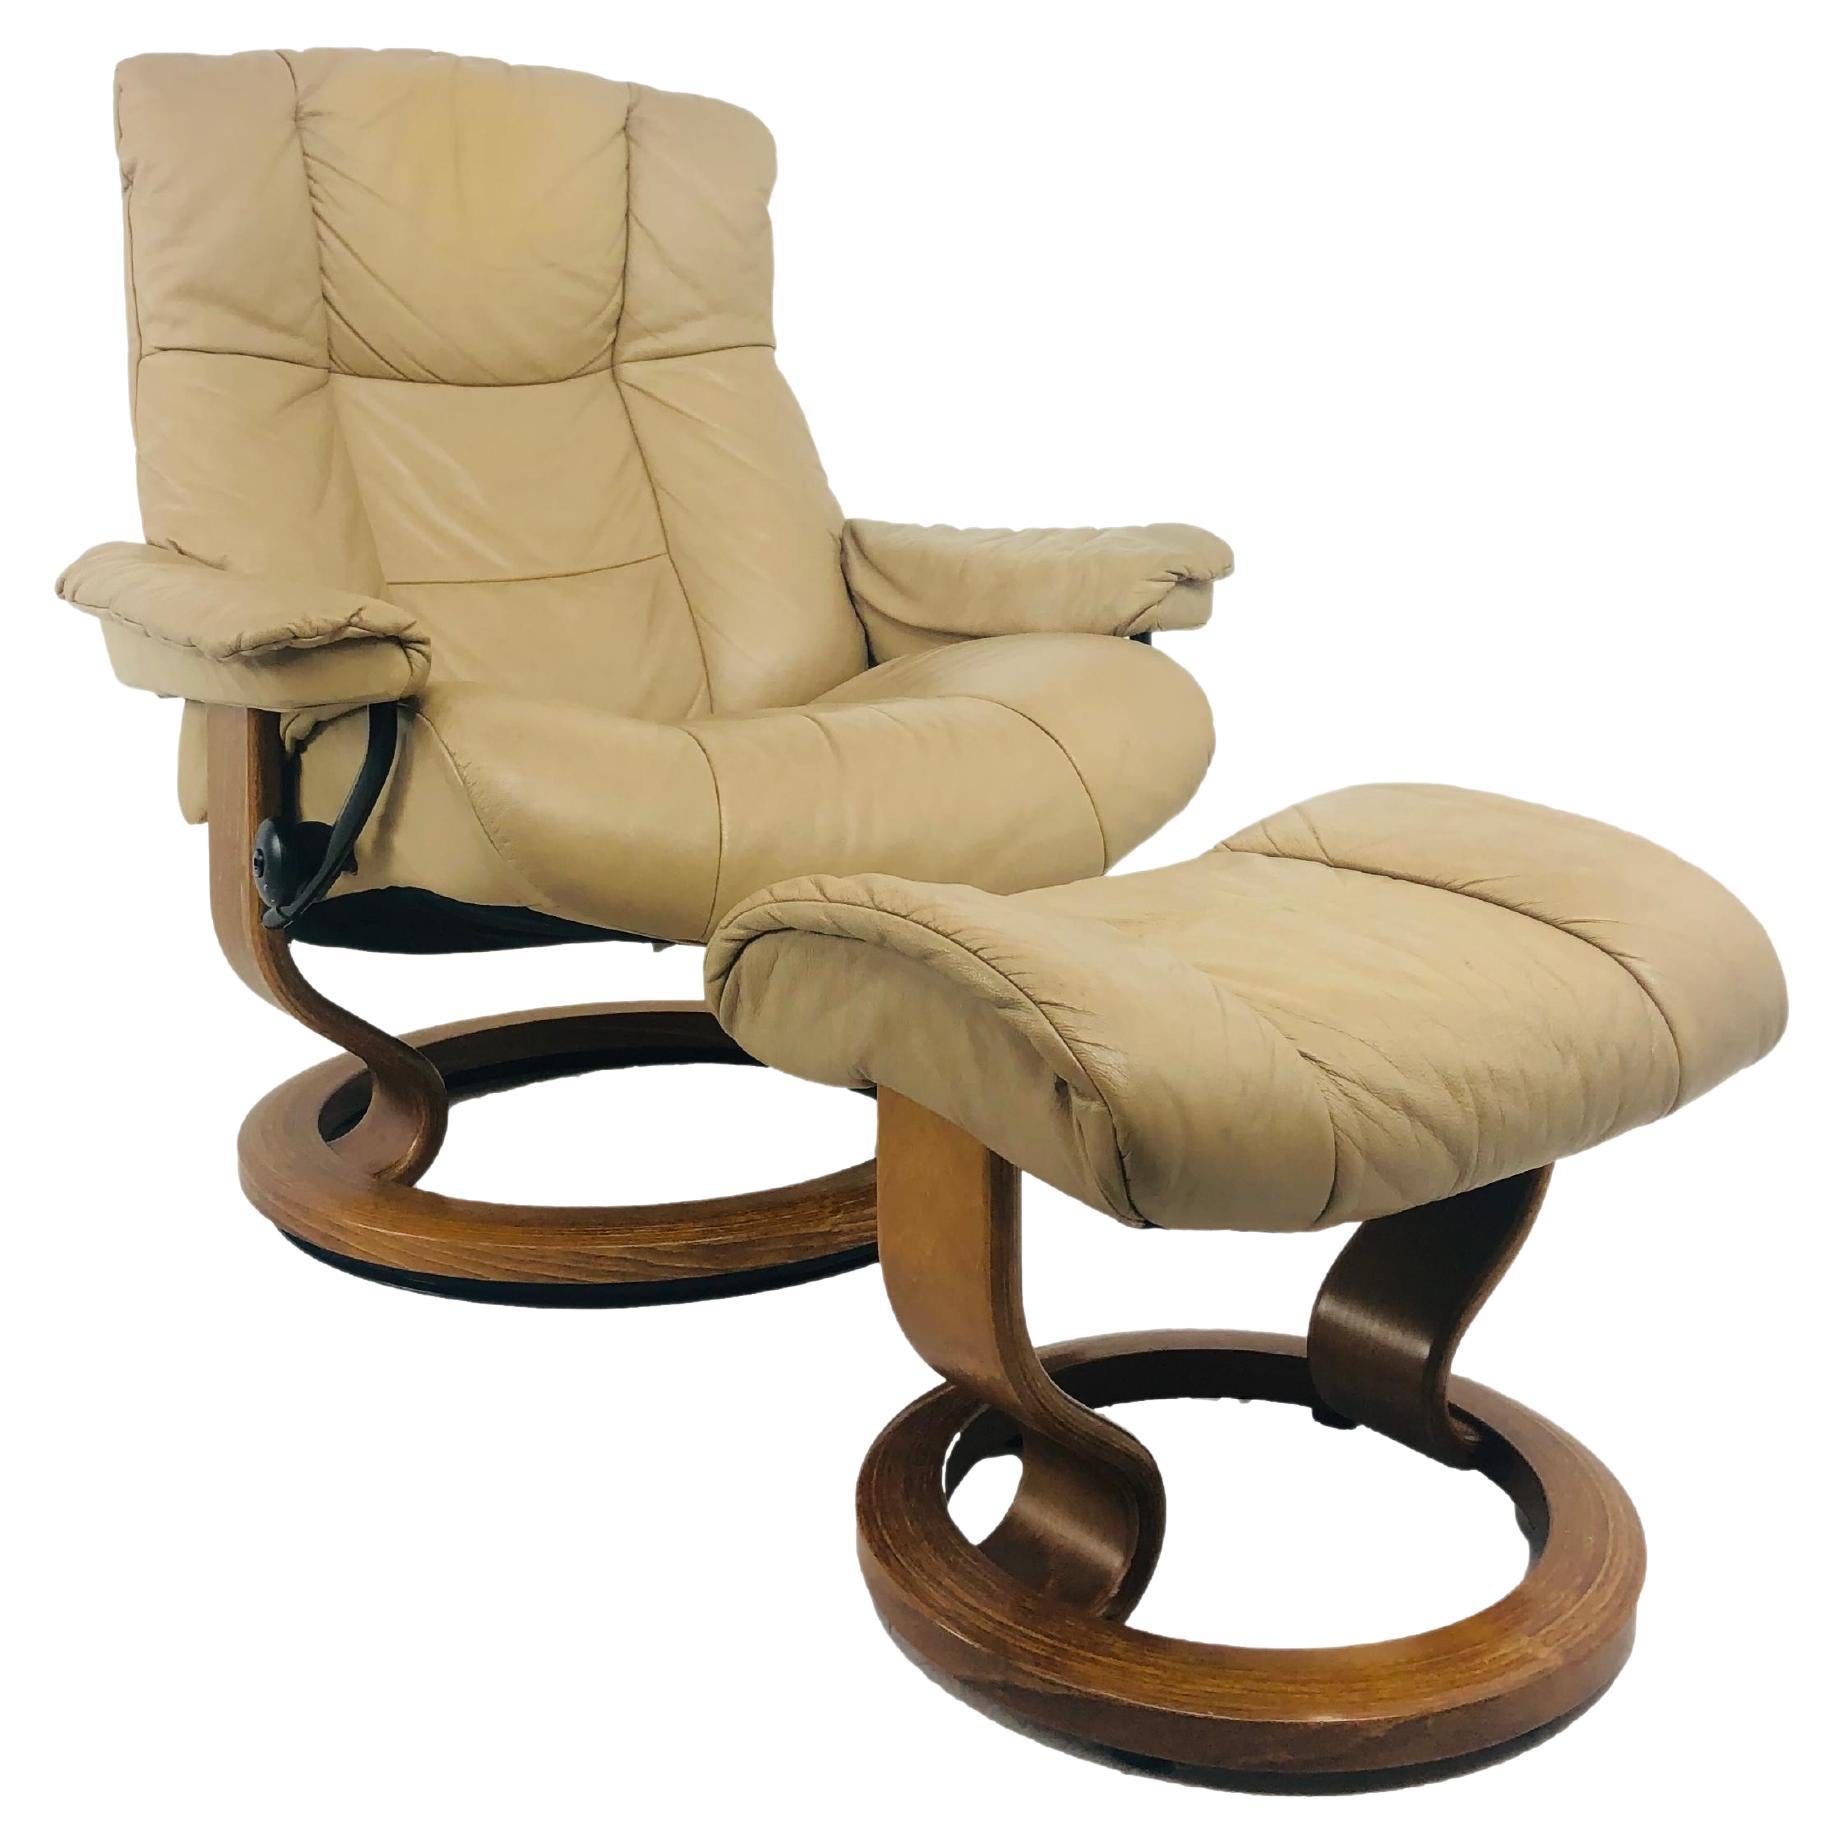 Ekrones "Mayfair" Stressless Lounge Chair with Ottoman For Sale